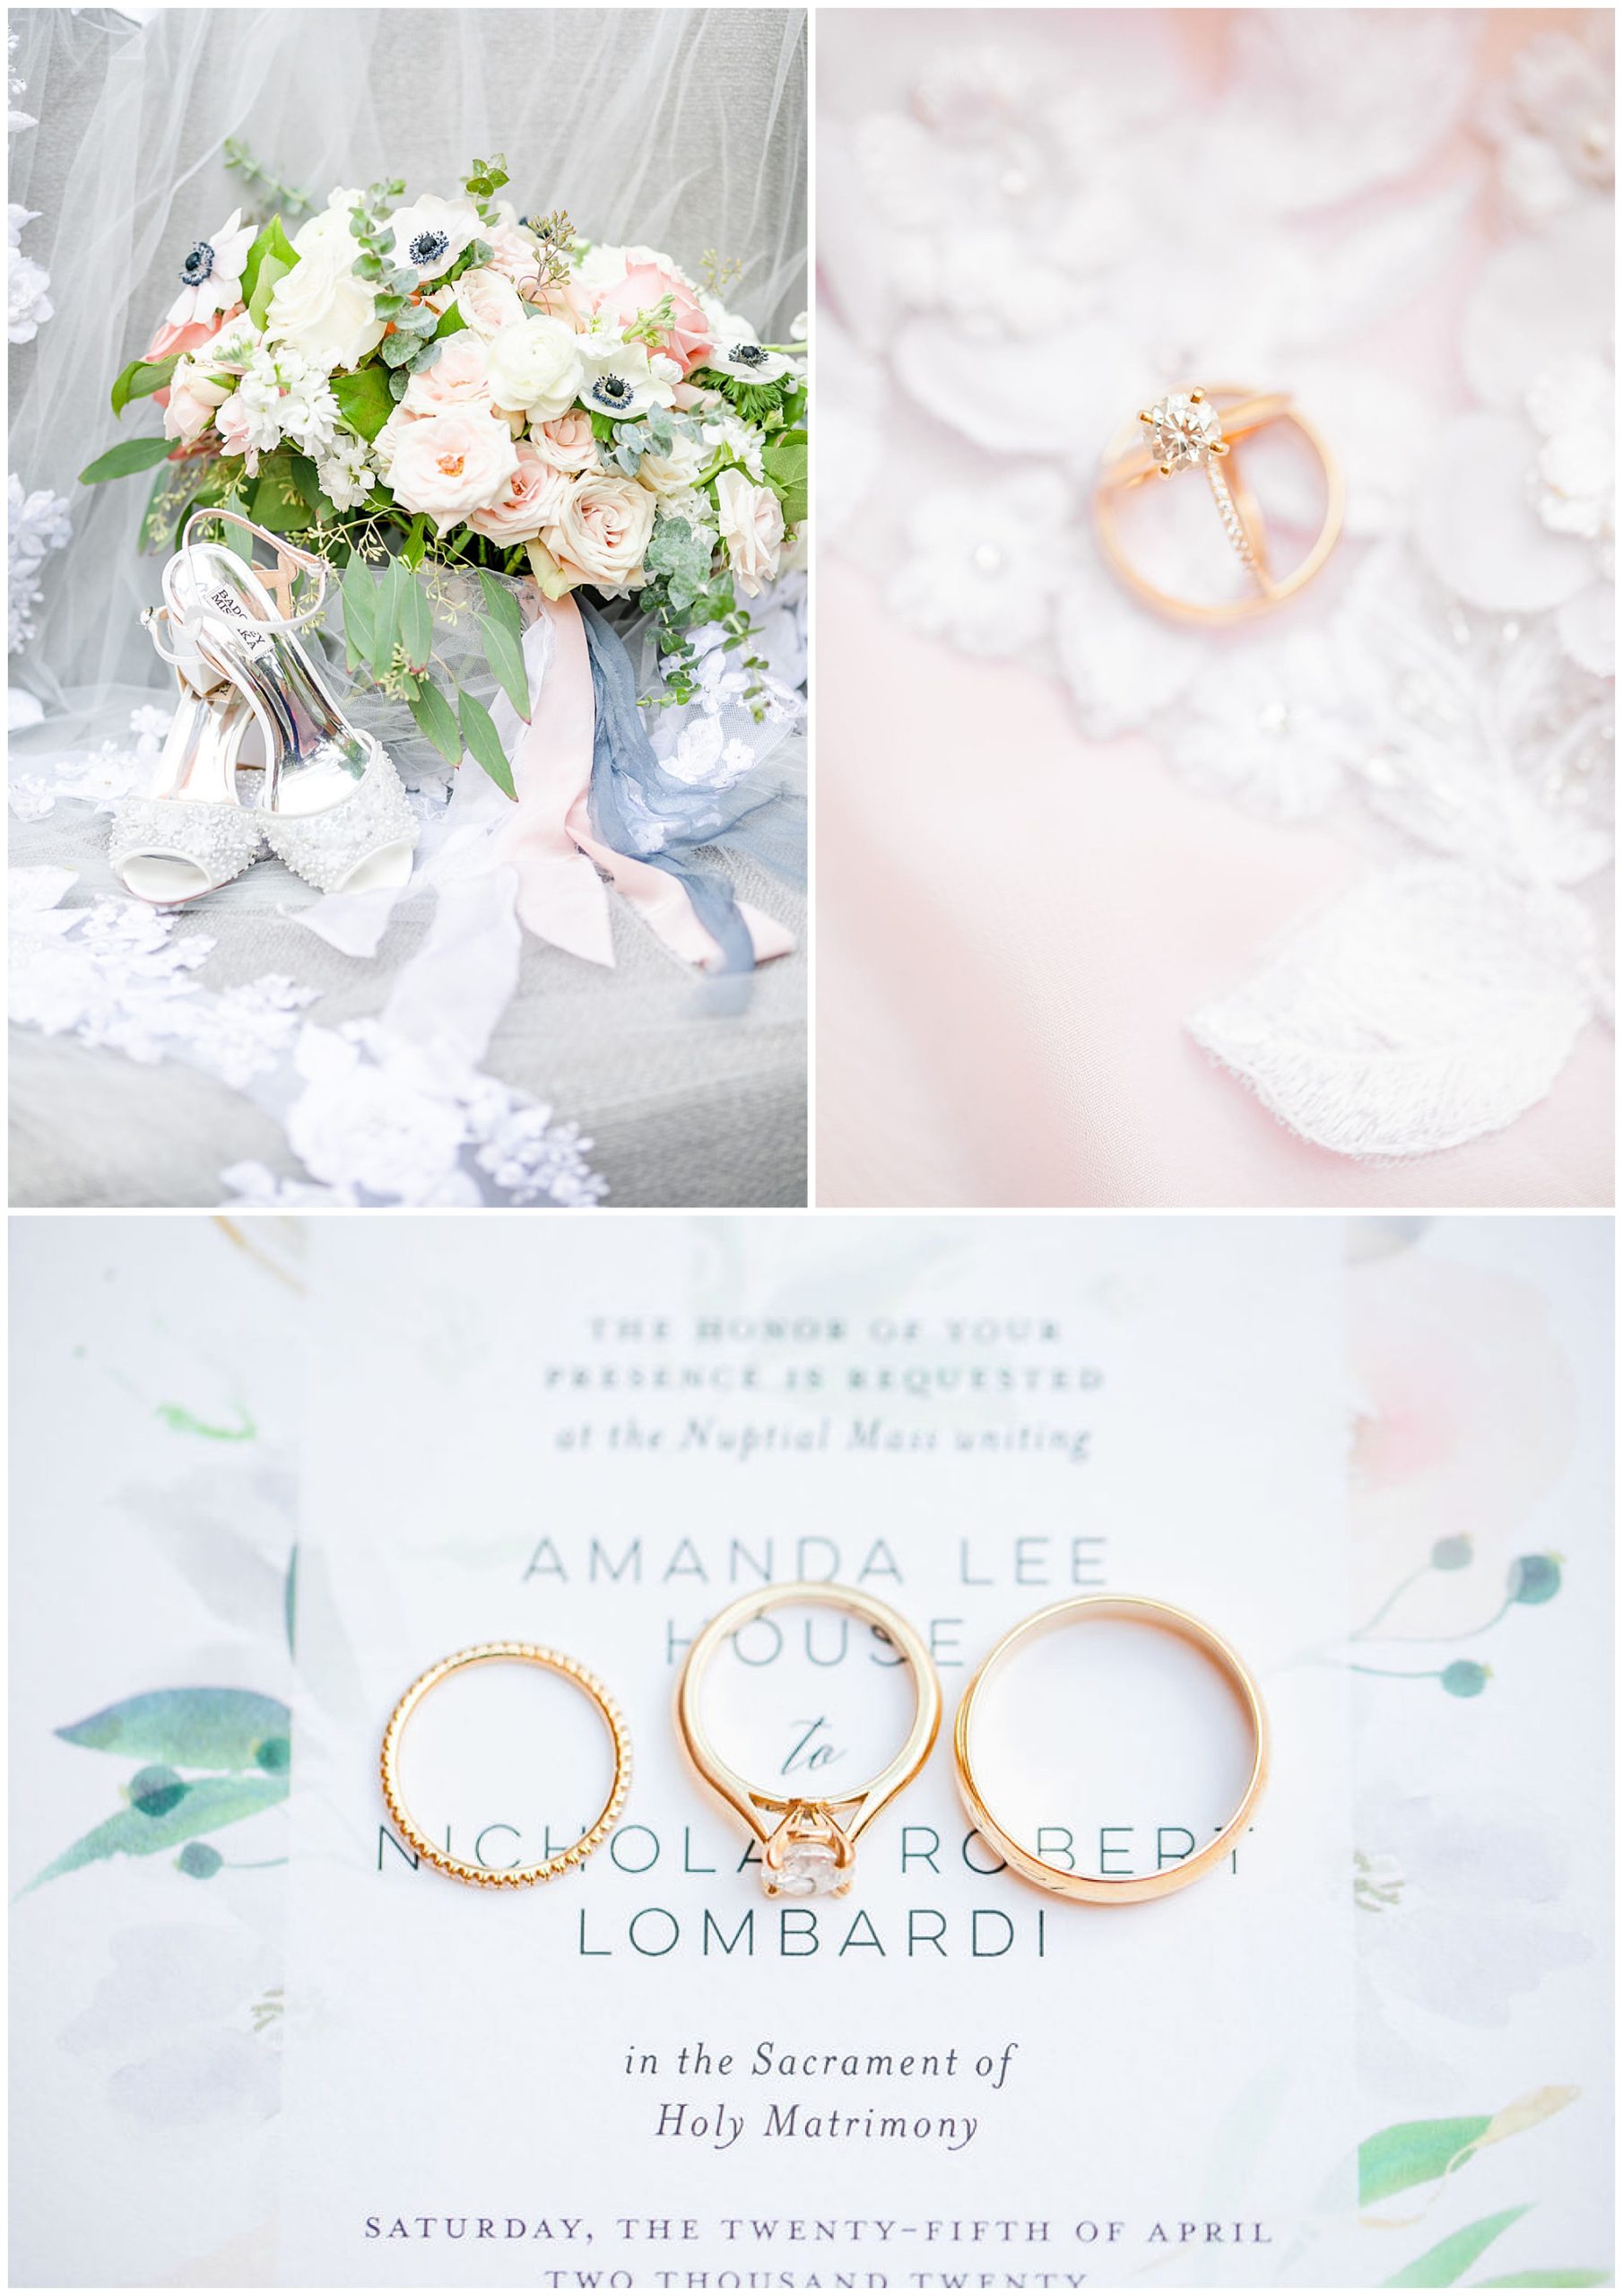 bridal details photo session, bridal details flatlay, flatlay photos, wedding details, wedding details photos, DC wedding photographer, wedding photography details, special wedding photos, flatlay photo session, DC wedding photographer, Rachel E.H. Photography, green pink white and blue bouquet, silver wedding shoes